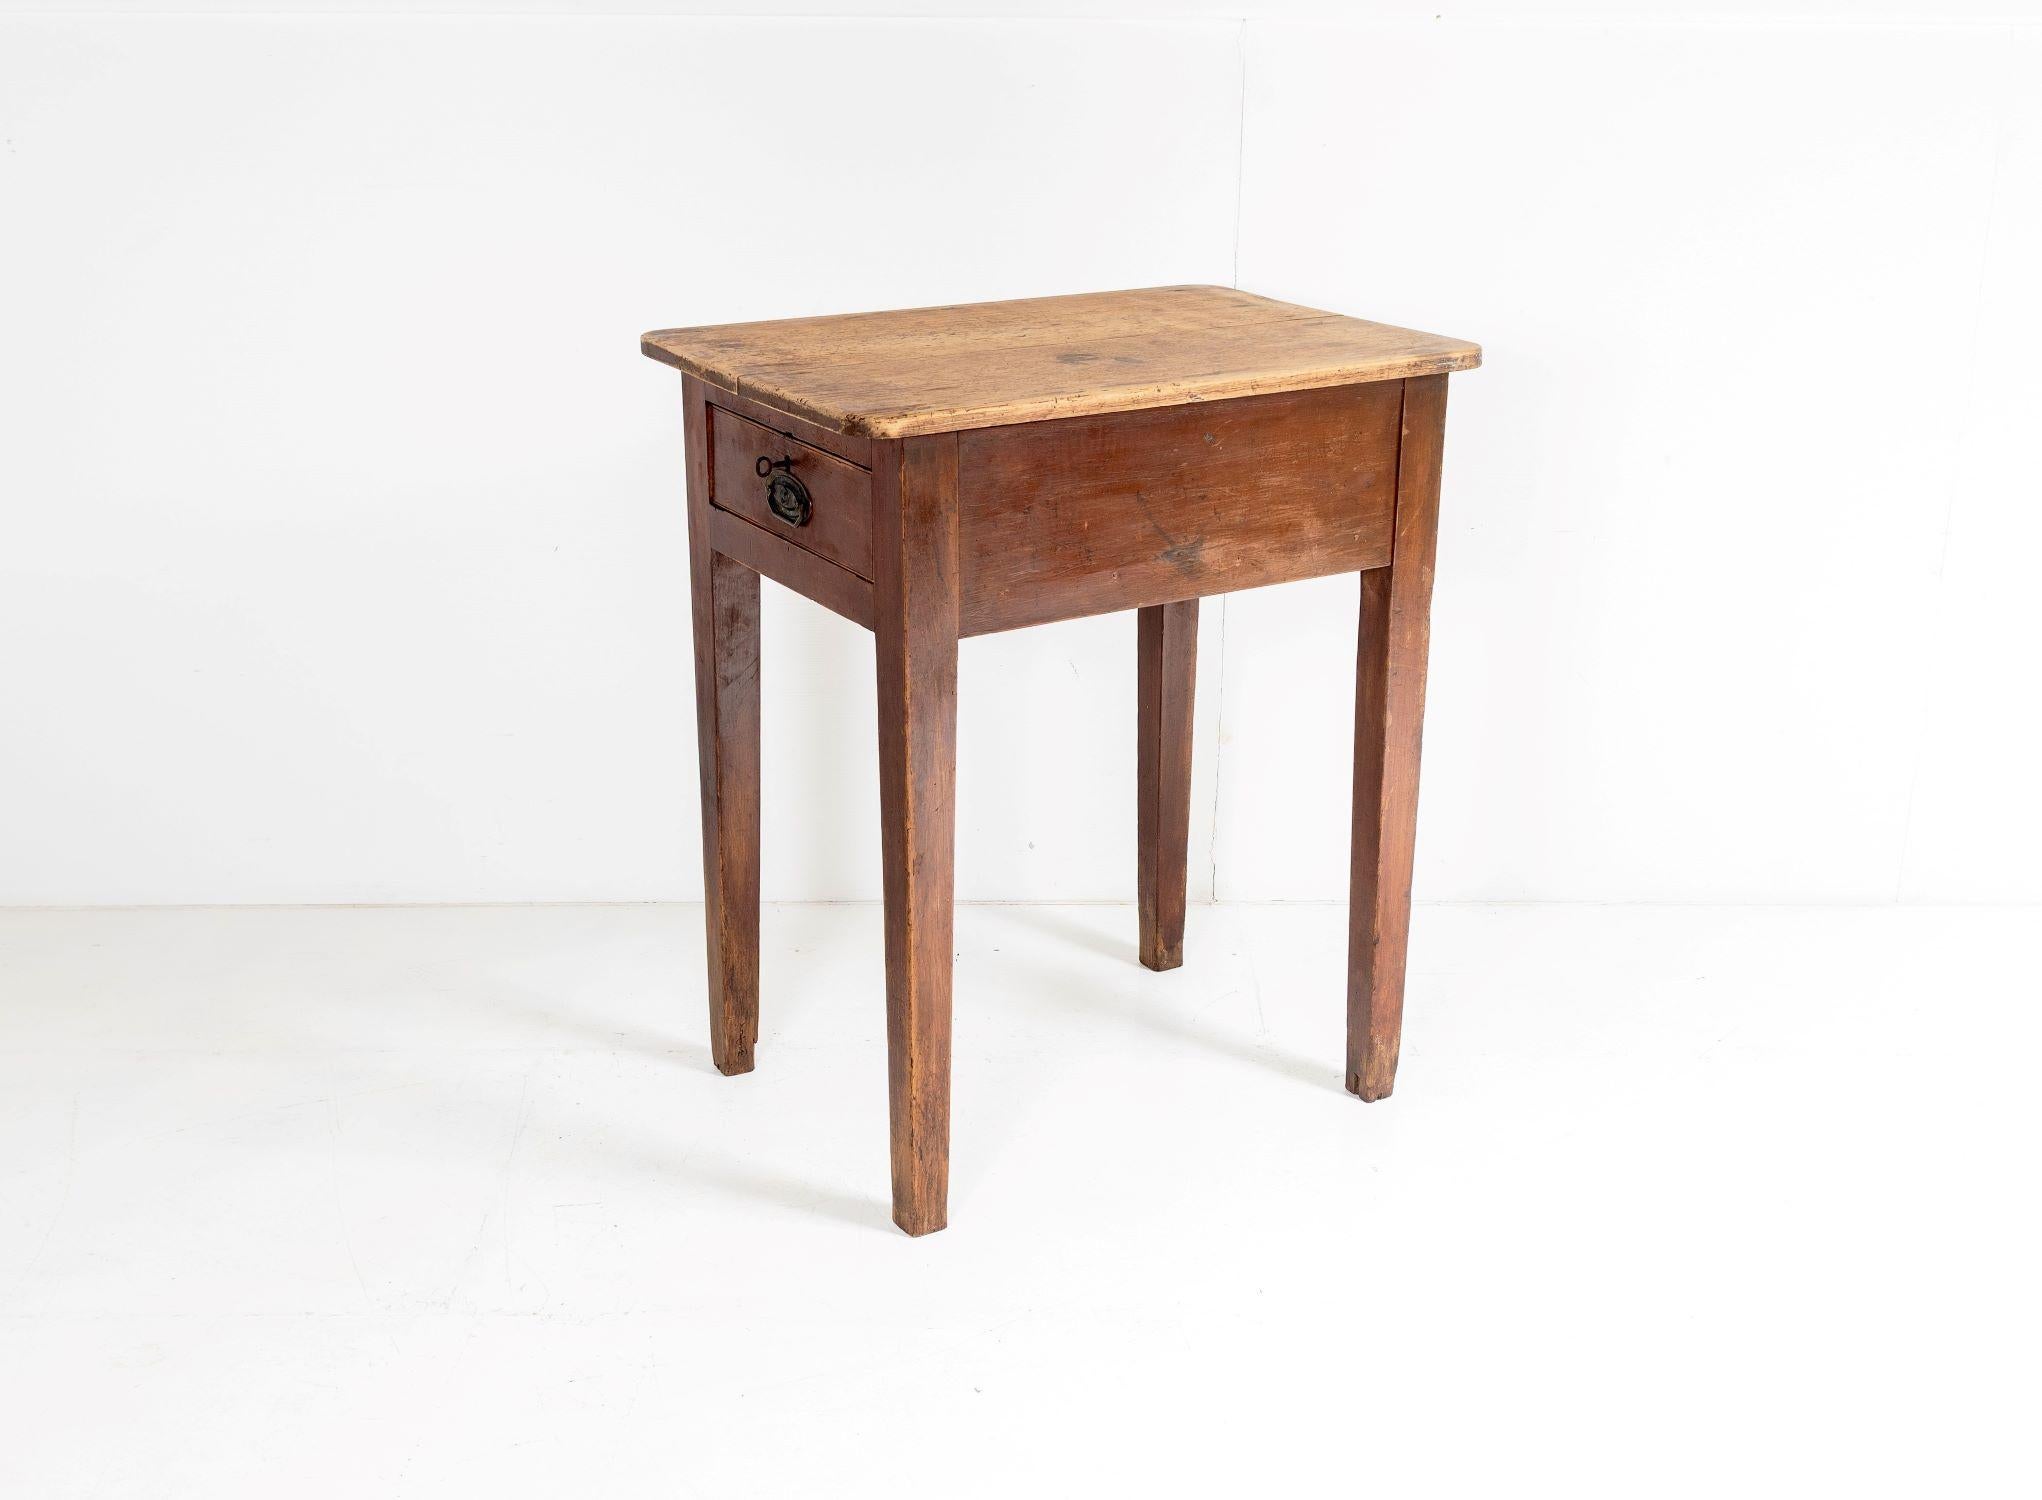 A charming high top church table from a small rural chapel in Wales.  As with all ecclesiastical furniture, this is a well constructed piece made from solid pine, it has a lovely warm tone and worn patina to it.  A small table that is unusually